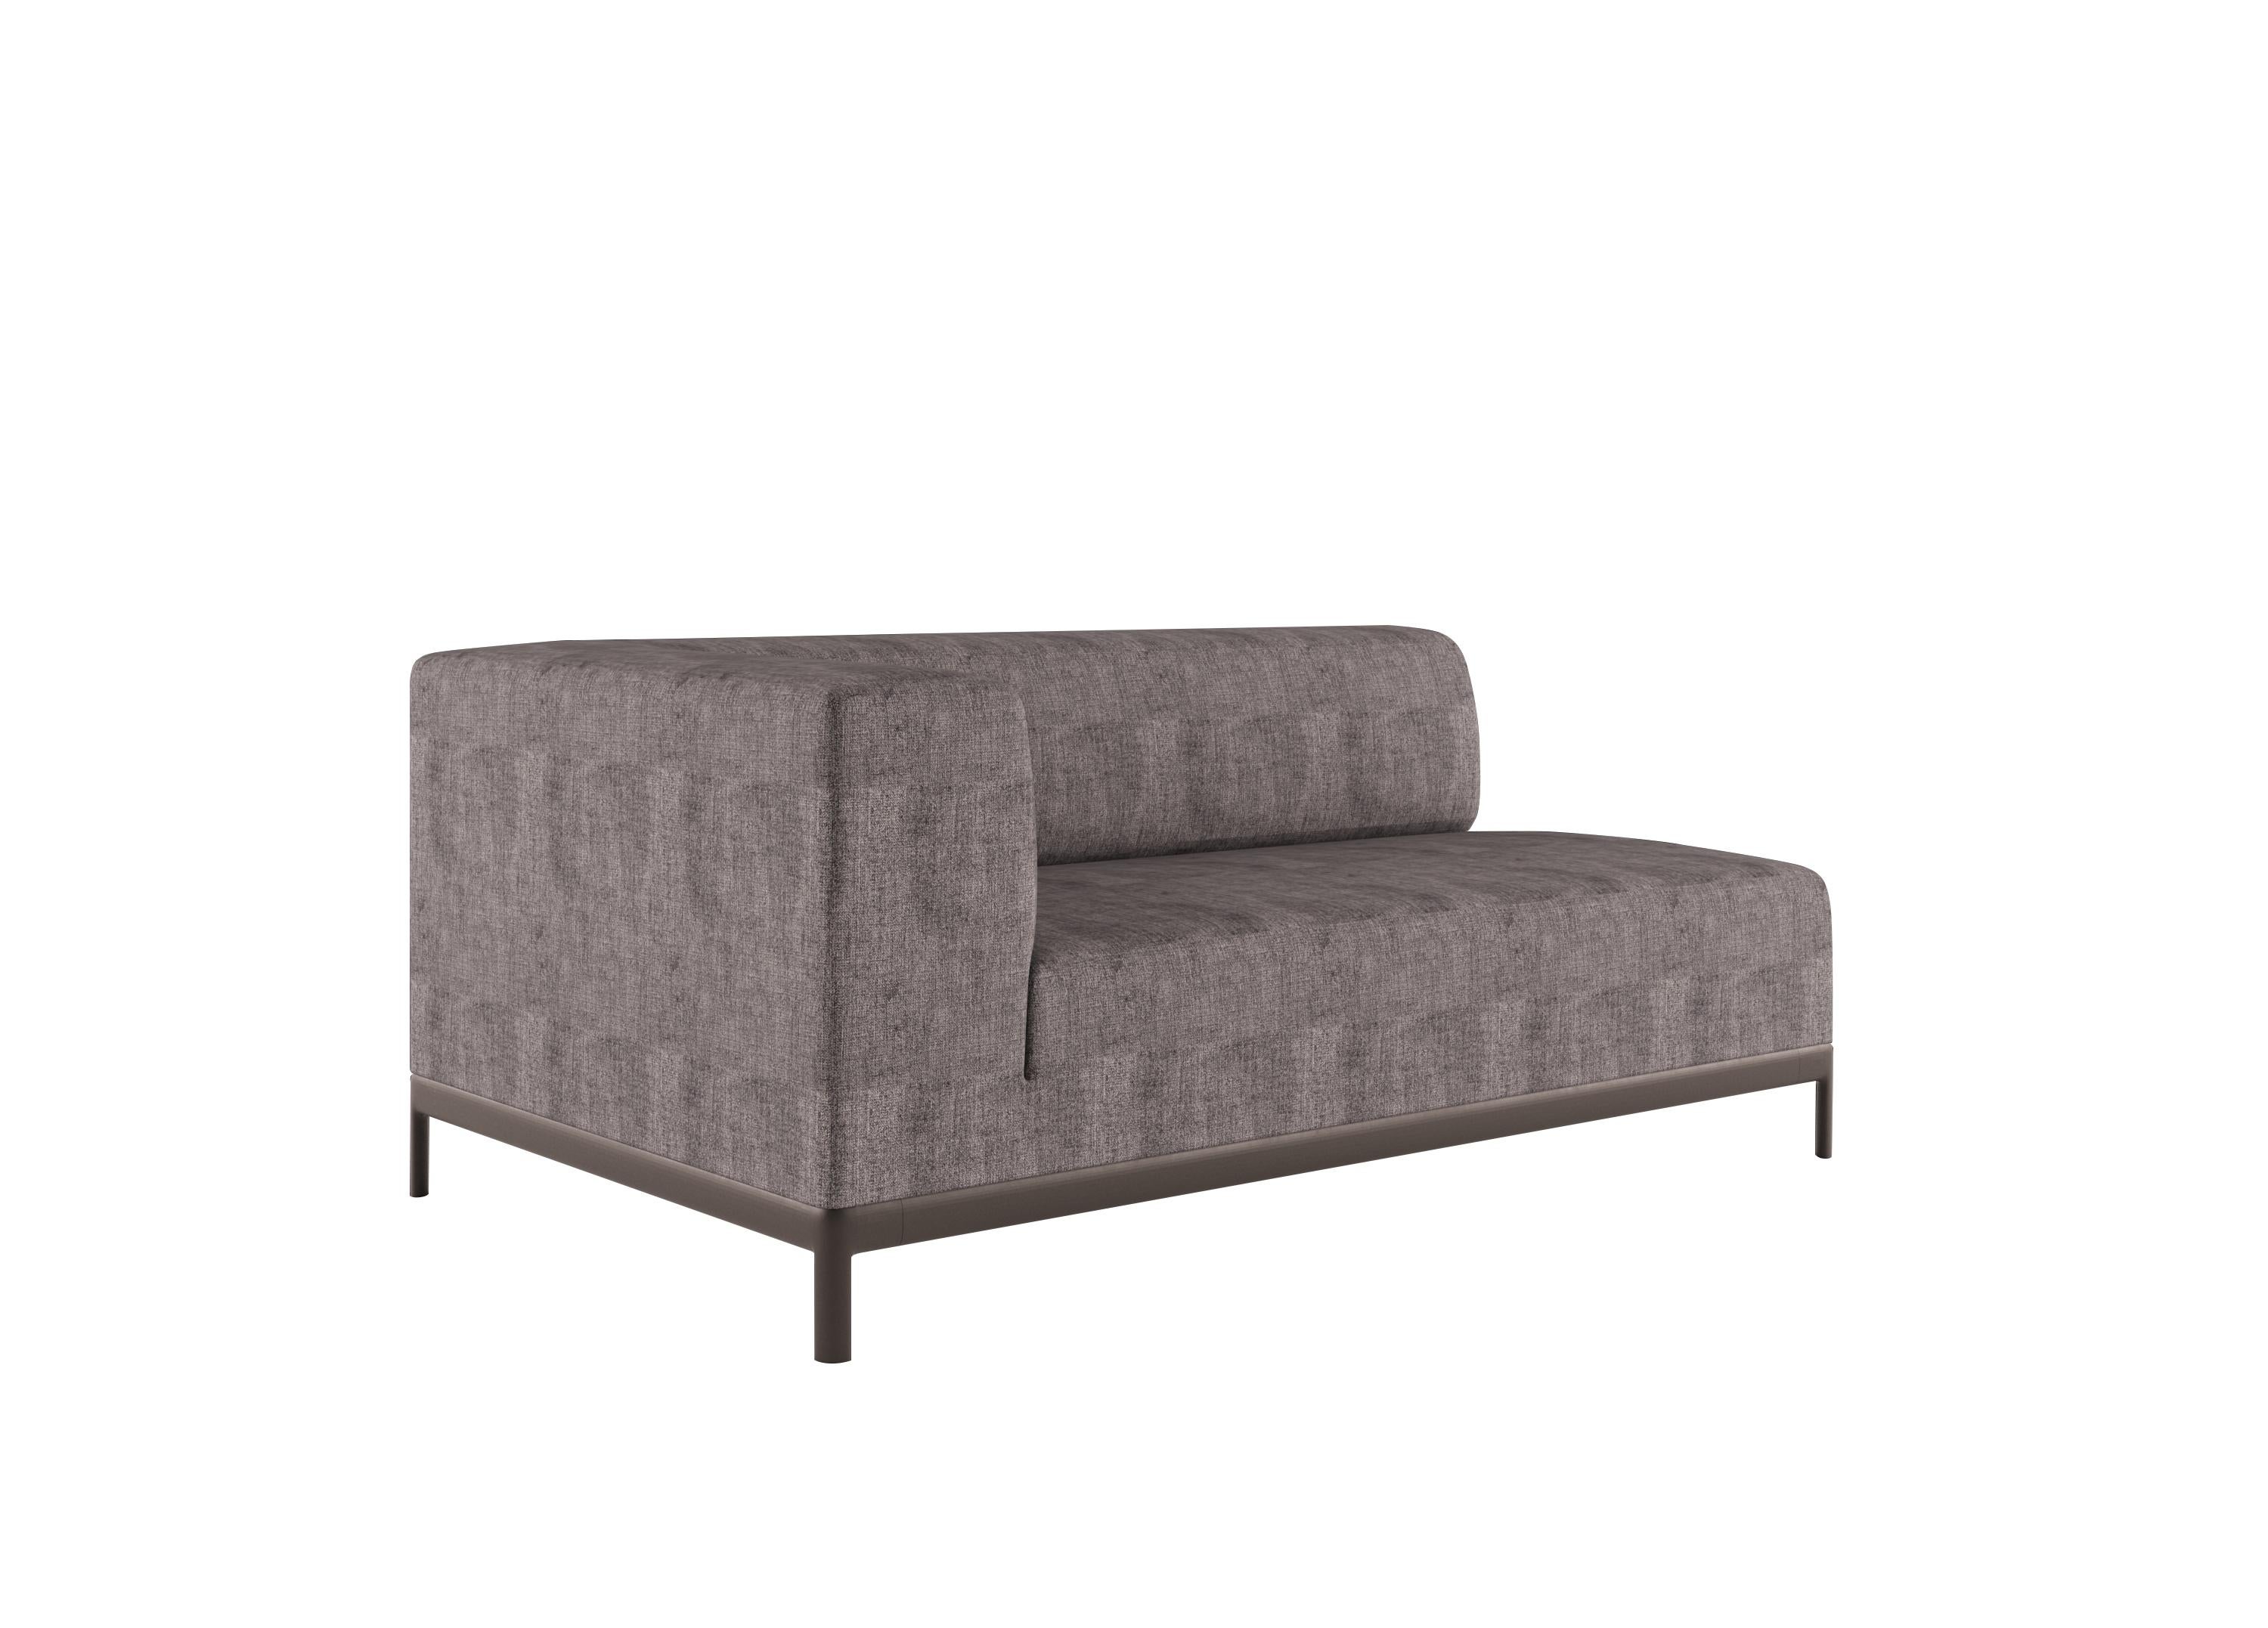 Alias P37 AluZen Soft Angular Sofa with Upholstery and Lacquered Aluminum Frame by Ludovica+Roberto Palomba

Modular corner element with structure in lacquered or polished aluminium.Seat, back and armrest with removable cover in fabric or